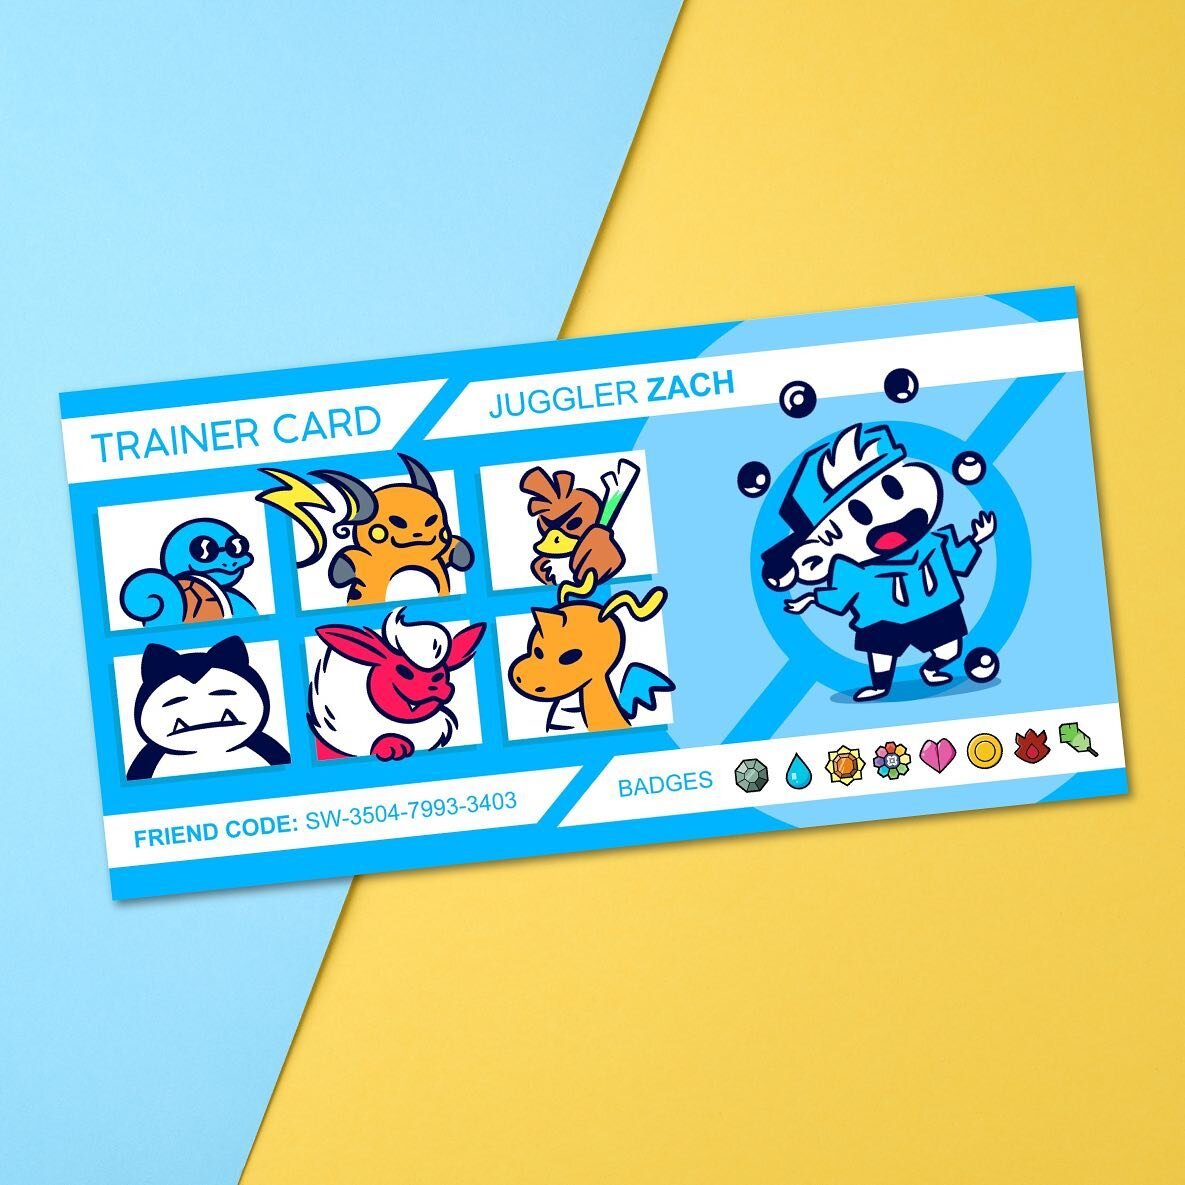 Trainer card templates now available over on my Patreon for as little as $1/month! (Link in bio)

#zachabstract #pokemonday #trainersona #patreon